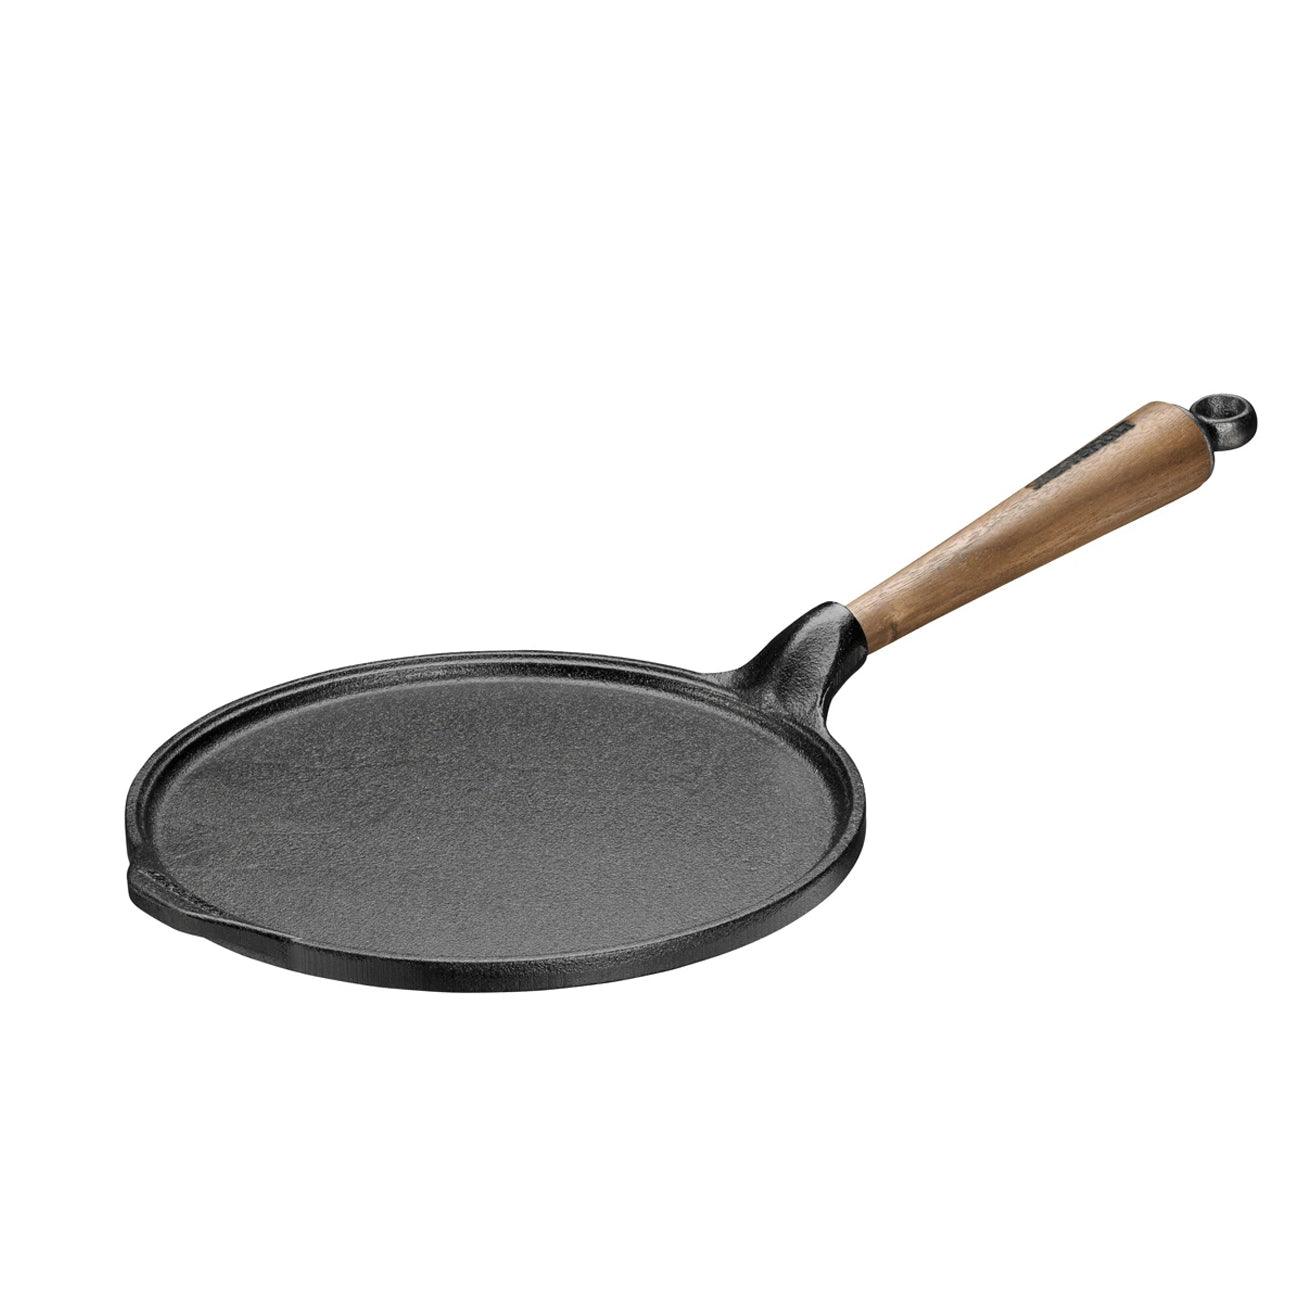 How to Release a Stuck Pancake from Your Skillet